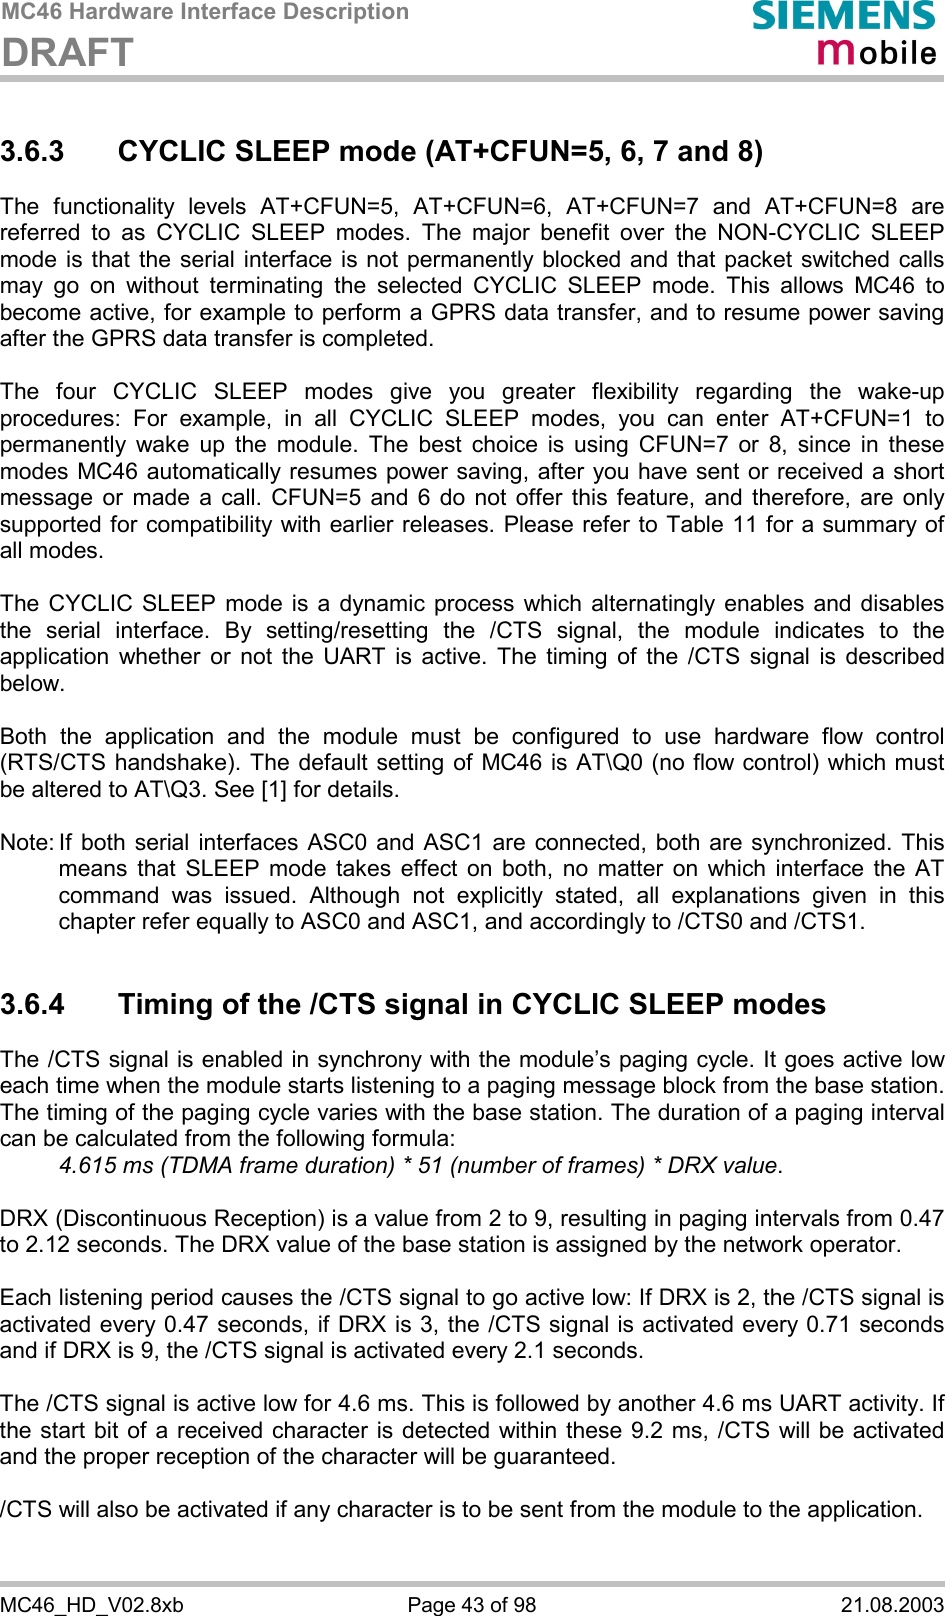 MC46 Hardware Interface Description DRAFT      MC46_HD_V02.8xb  Page 43 of 98  21.08.2003 3.6.3  CYCLIC SLEEP mode (AT+CFUN=5, 6, 7 and 8) The functionality levels AT+CFUN=5, AT+CFUN=6, AT+CFUN=7 and AT+CFUN=8 are referred to as CYCLIC SLEEP modes. The major benefit over the NON-CYCLIC SLEEP mode is that the serial interface is not permanently blocked and that packet switched calls may go on without terminating the selected CYCLIC SLEEP mode. This allows MC46 to become active, for example to perform a GPRS data transfer, and to resume power saving after the GPRS data transfer is completed.  The four CYCLIC SLEEP modes give you greater flexibility regarding the wake-up procedures: For example, in all CYCLIC SLEEP modes, you can enter AT+CFUN=1 to permanently wake up the module. The best choice is using CFUN=7 or 8, since in these modes MC46 automatically resumes power saving, after you have sent or received a short message or made a call. CFUN=5 and 6 do not offer this feature, and therefore, are only supported for compatibility with earlier releases. Please refer to Table 11 for a summary of all modes.  The CYCLIC SLEEP mode is a dynamic process which alternatingly enables and disables the serial interface. By setting/resetting the /CTS signal, the module indicates to the application whether or not the UART is active. The timing of the /CTS signal is described below.   Both the application and the module must be configured to use hardware flow control (RTS/CTS handshake). The default setting of MC46 is AT\Q0 (no flow control) which must be altered to AT\Q3. See [1] for details.  Note: If both serial interfaces ASC0 and ASC1 are connected, both are synchronized. This means that SLEEP mode takes effect on both, no matter on which interface the AT command was issued. Although not explicitly stated, all explanations given in this chapter refer equally to ASC0 and ASC1, and accordingly to /CTS0 and /CTS1.   3.6.4  Timing of the /CTS signal in CYCLIC SLEEP modes The /CTS signal is enabled in synchrony with the module’s paging cycle. It goes active low each time when the module starts listening to a paging message block from the base station. The timing of the paging cycle varies with the base station. The duration of a paging interval can be calculated from the following formula:  4.615 ms (TDMA frame duration) * 51 (number of frames) * DRX value.   DRX (Discontinuous Reception) is a value from 2 to 9, resulting in paging intervals from 0.47 to 2.12 seconds. The DRX value of the base station is assigned by the network operator.   Each listening period causes the /CTS signal to go active low: If DRX is 2, the /CTS signal is activated every 0.47 seconds, if DRX is 3, the /CTS signal is activated every 0.71 seconds and if DRX is 9, the /CTS signal is activated every 2.1 seconds.  The /CTS signal is active low for 4.6 ms. This is followed by another 4.6 ms UART activity. If the start bit of a received character is detected within these 9.2 ms, /CTS will be activated and the proper reception of the character will be guaranteed.   /CTS will also be activated if any character is to be sent from the module to the application.  